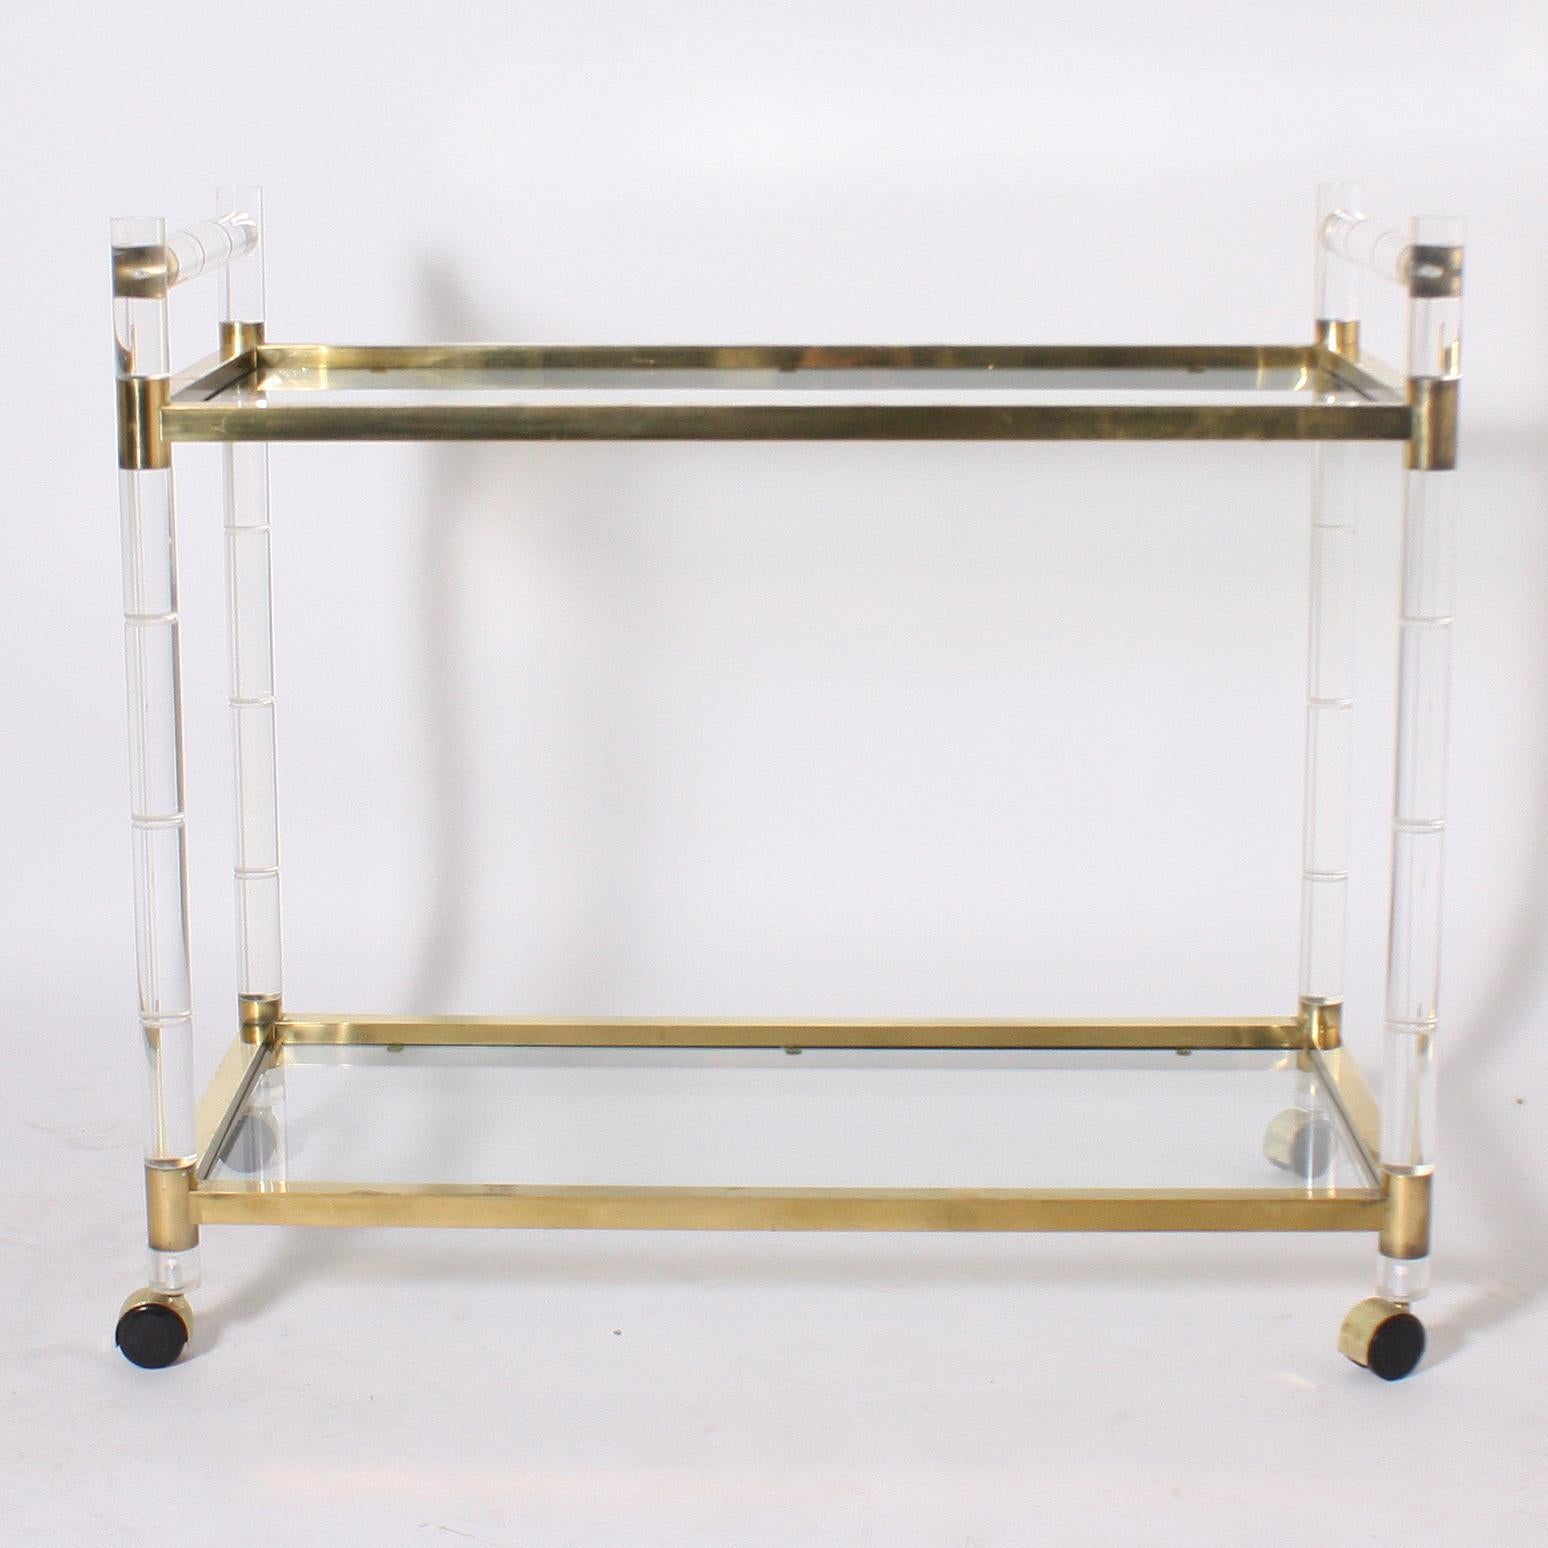 Lucite and brass faux bamboo drinks cart, circa 1970.
Measures: 37” W x 18 3/4” D x 33” H.